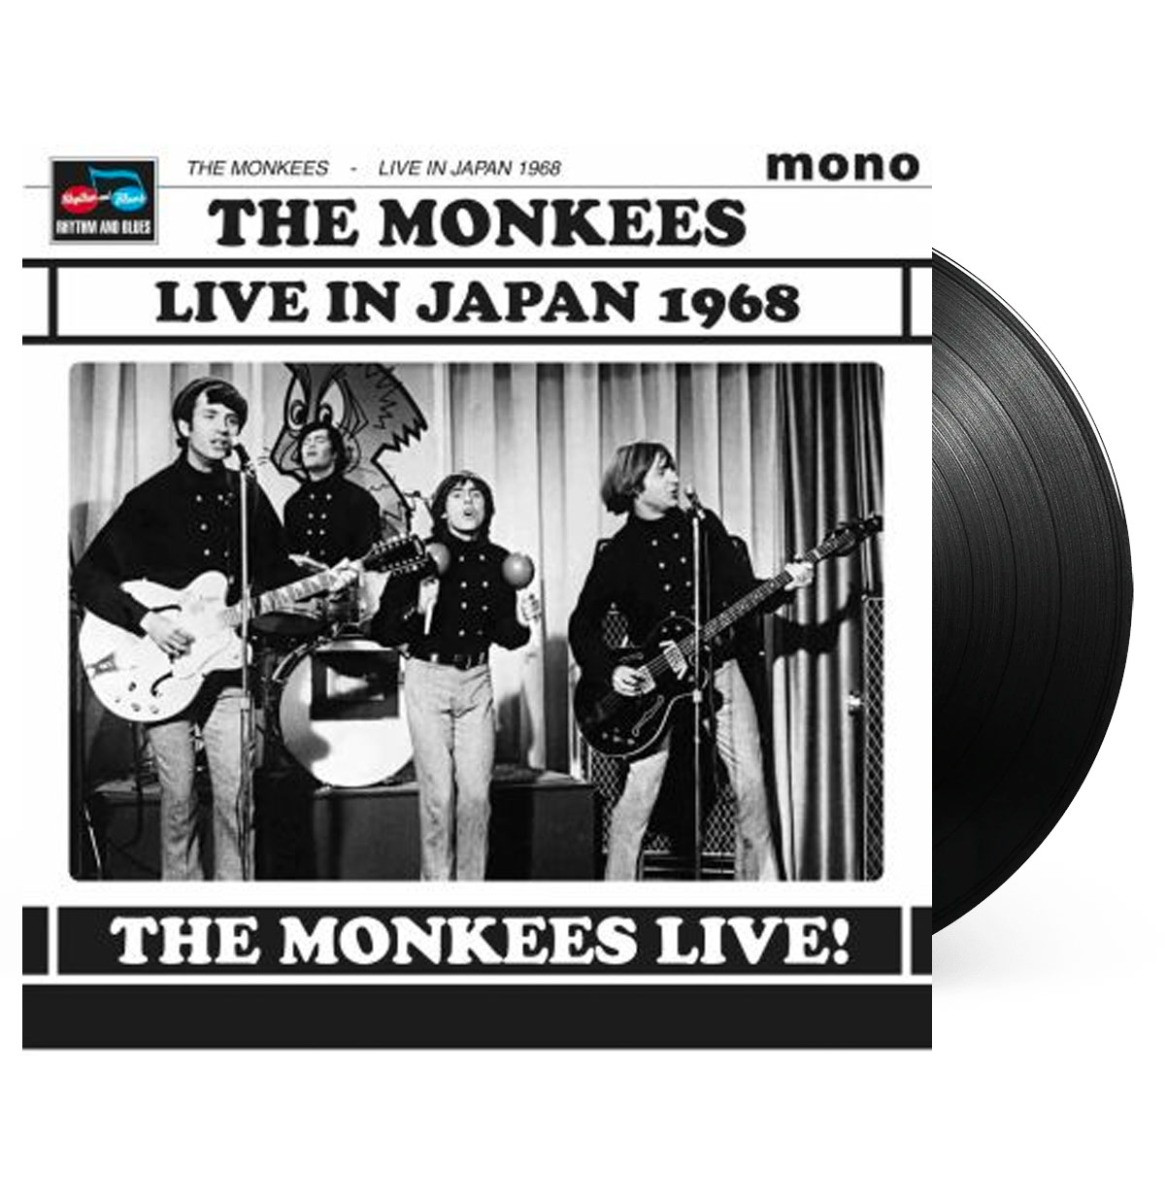 The Monkees - Live In Japan 1968 LP